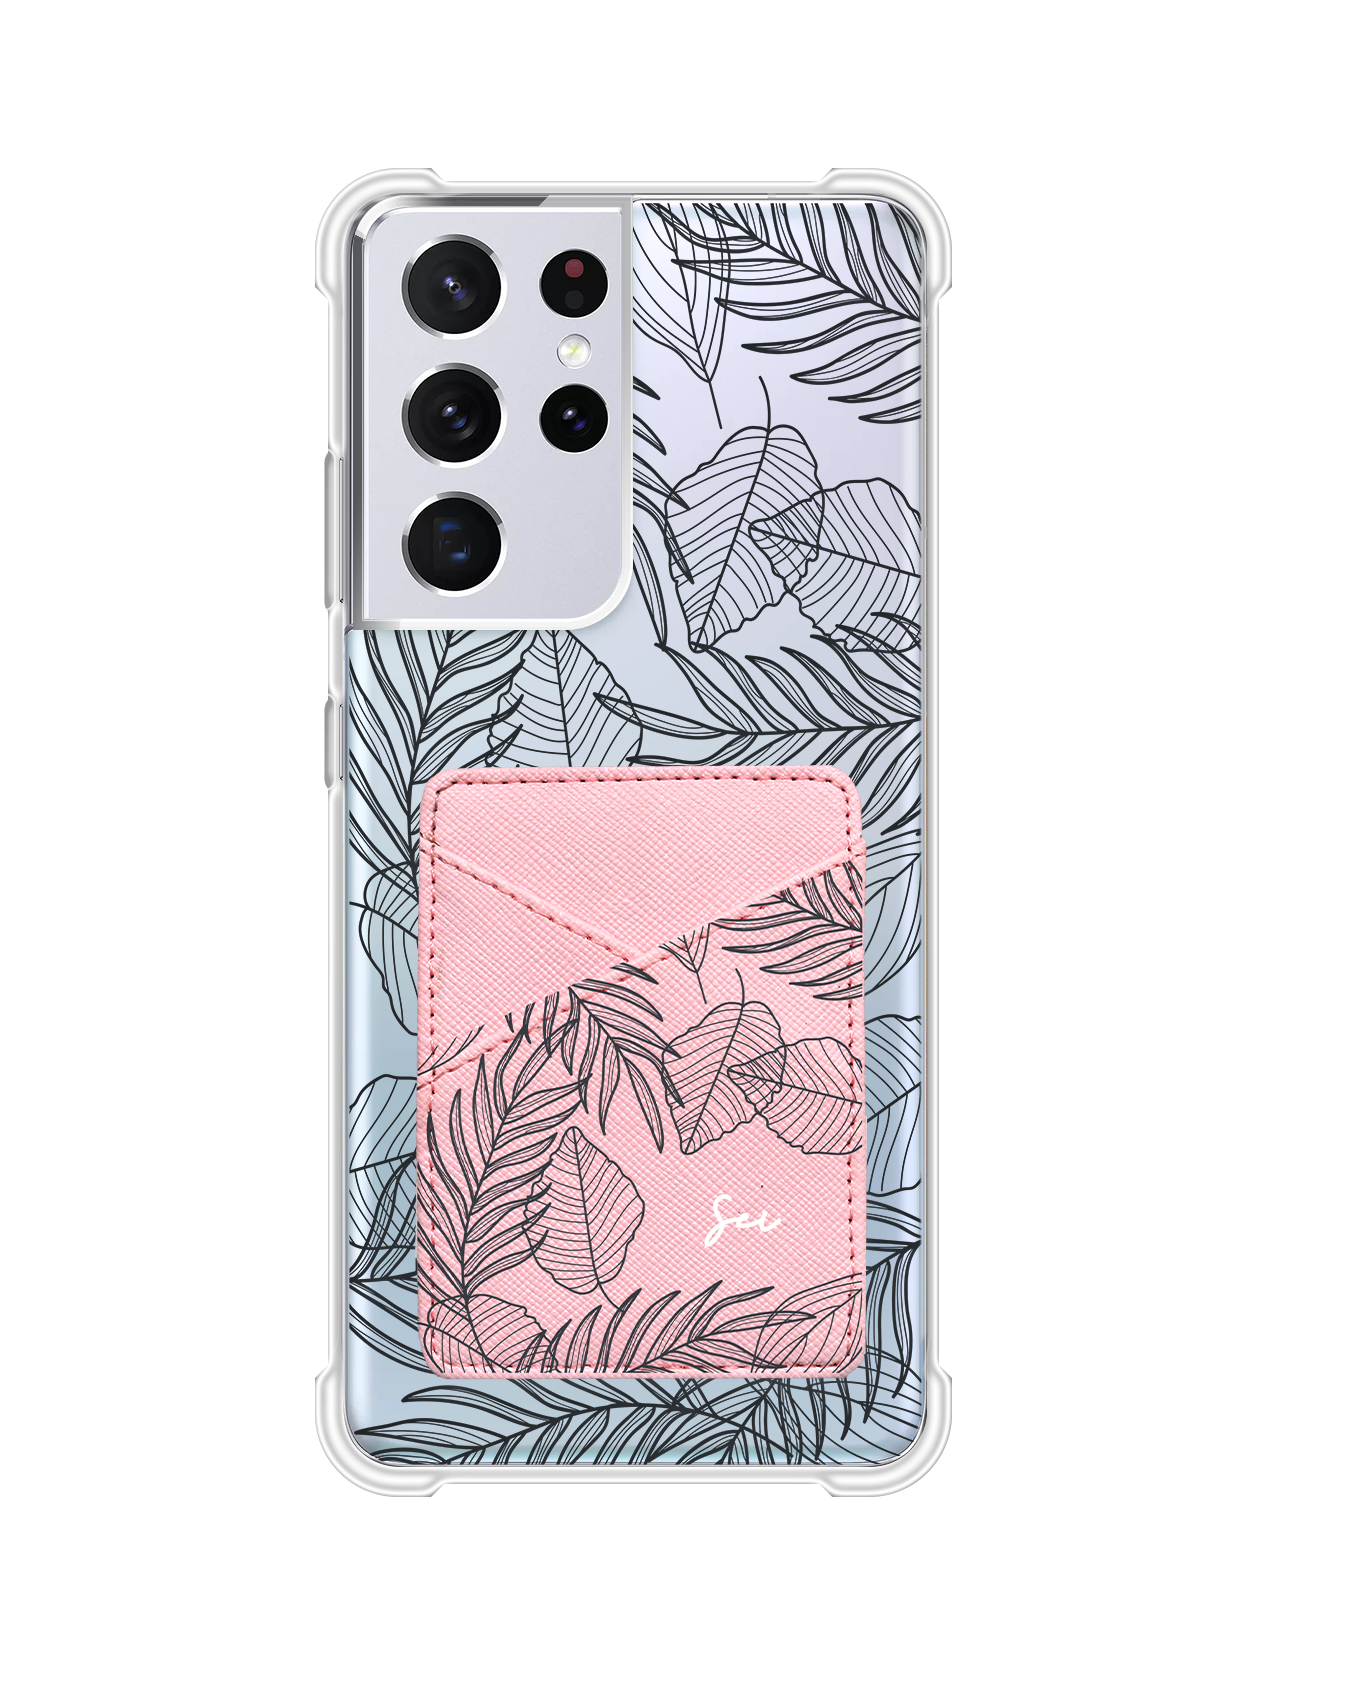 Android Phone Wallet Case - Sketchy Tropical 2.0